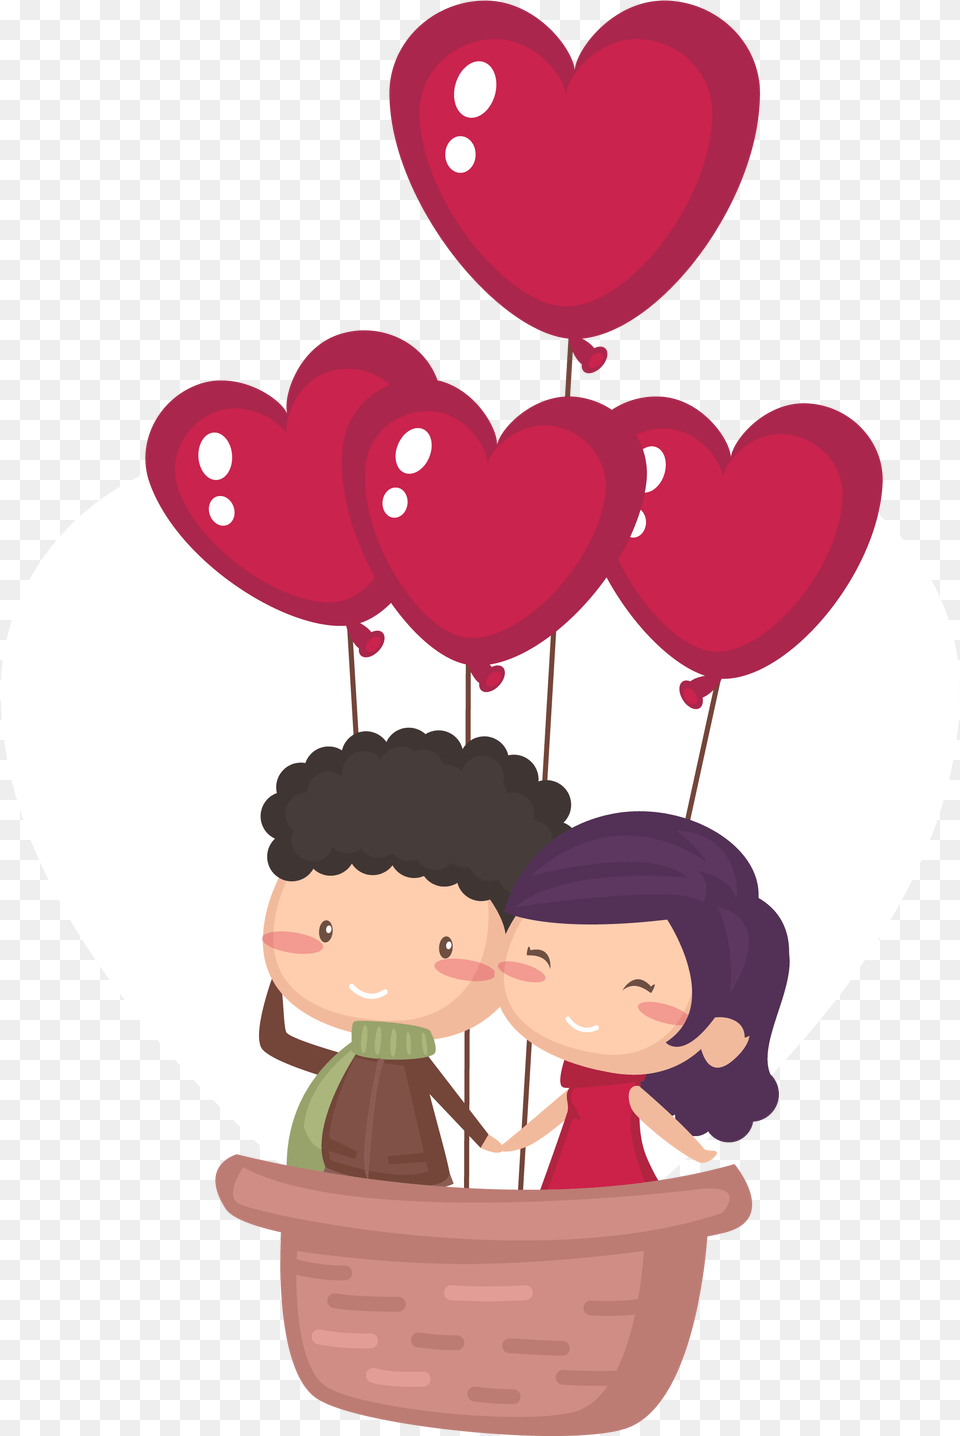 Love Wallpaper Hd For Mobile, Balloon, Baby, Person, Face Png Image